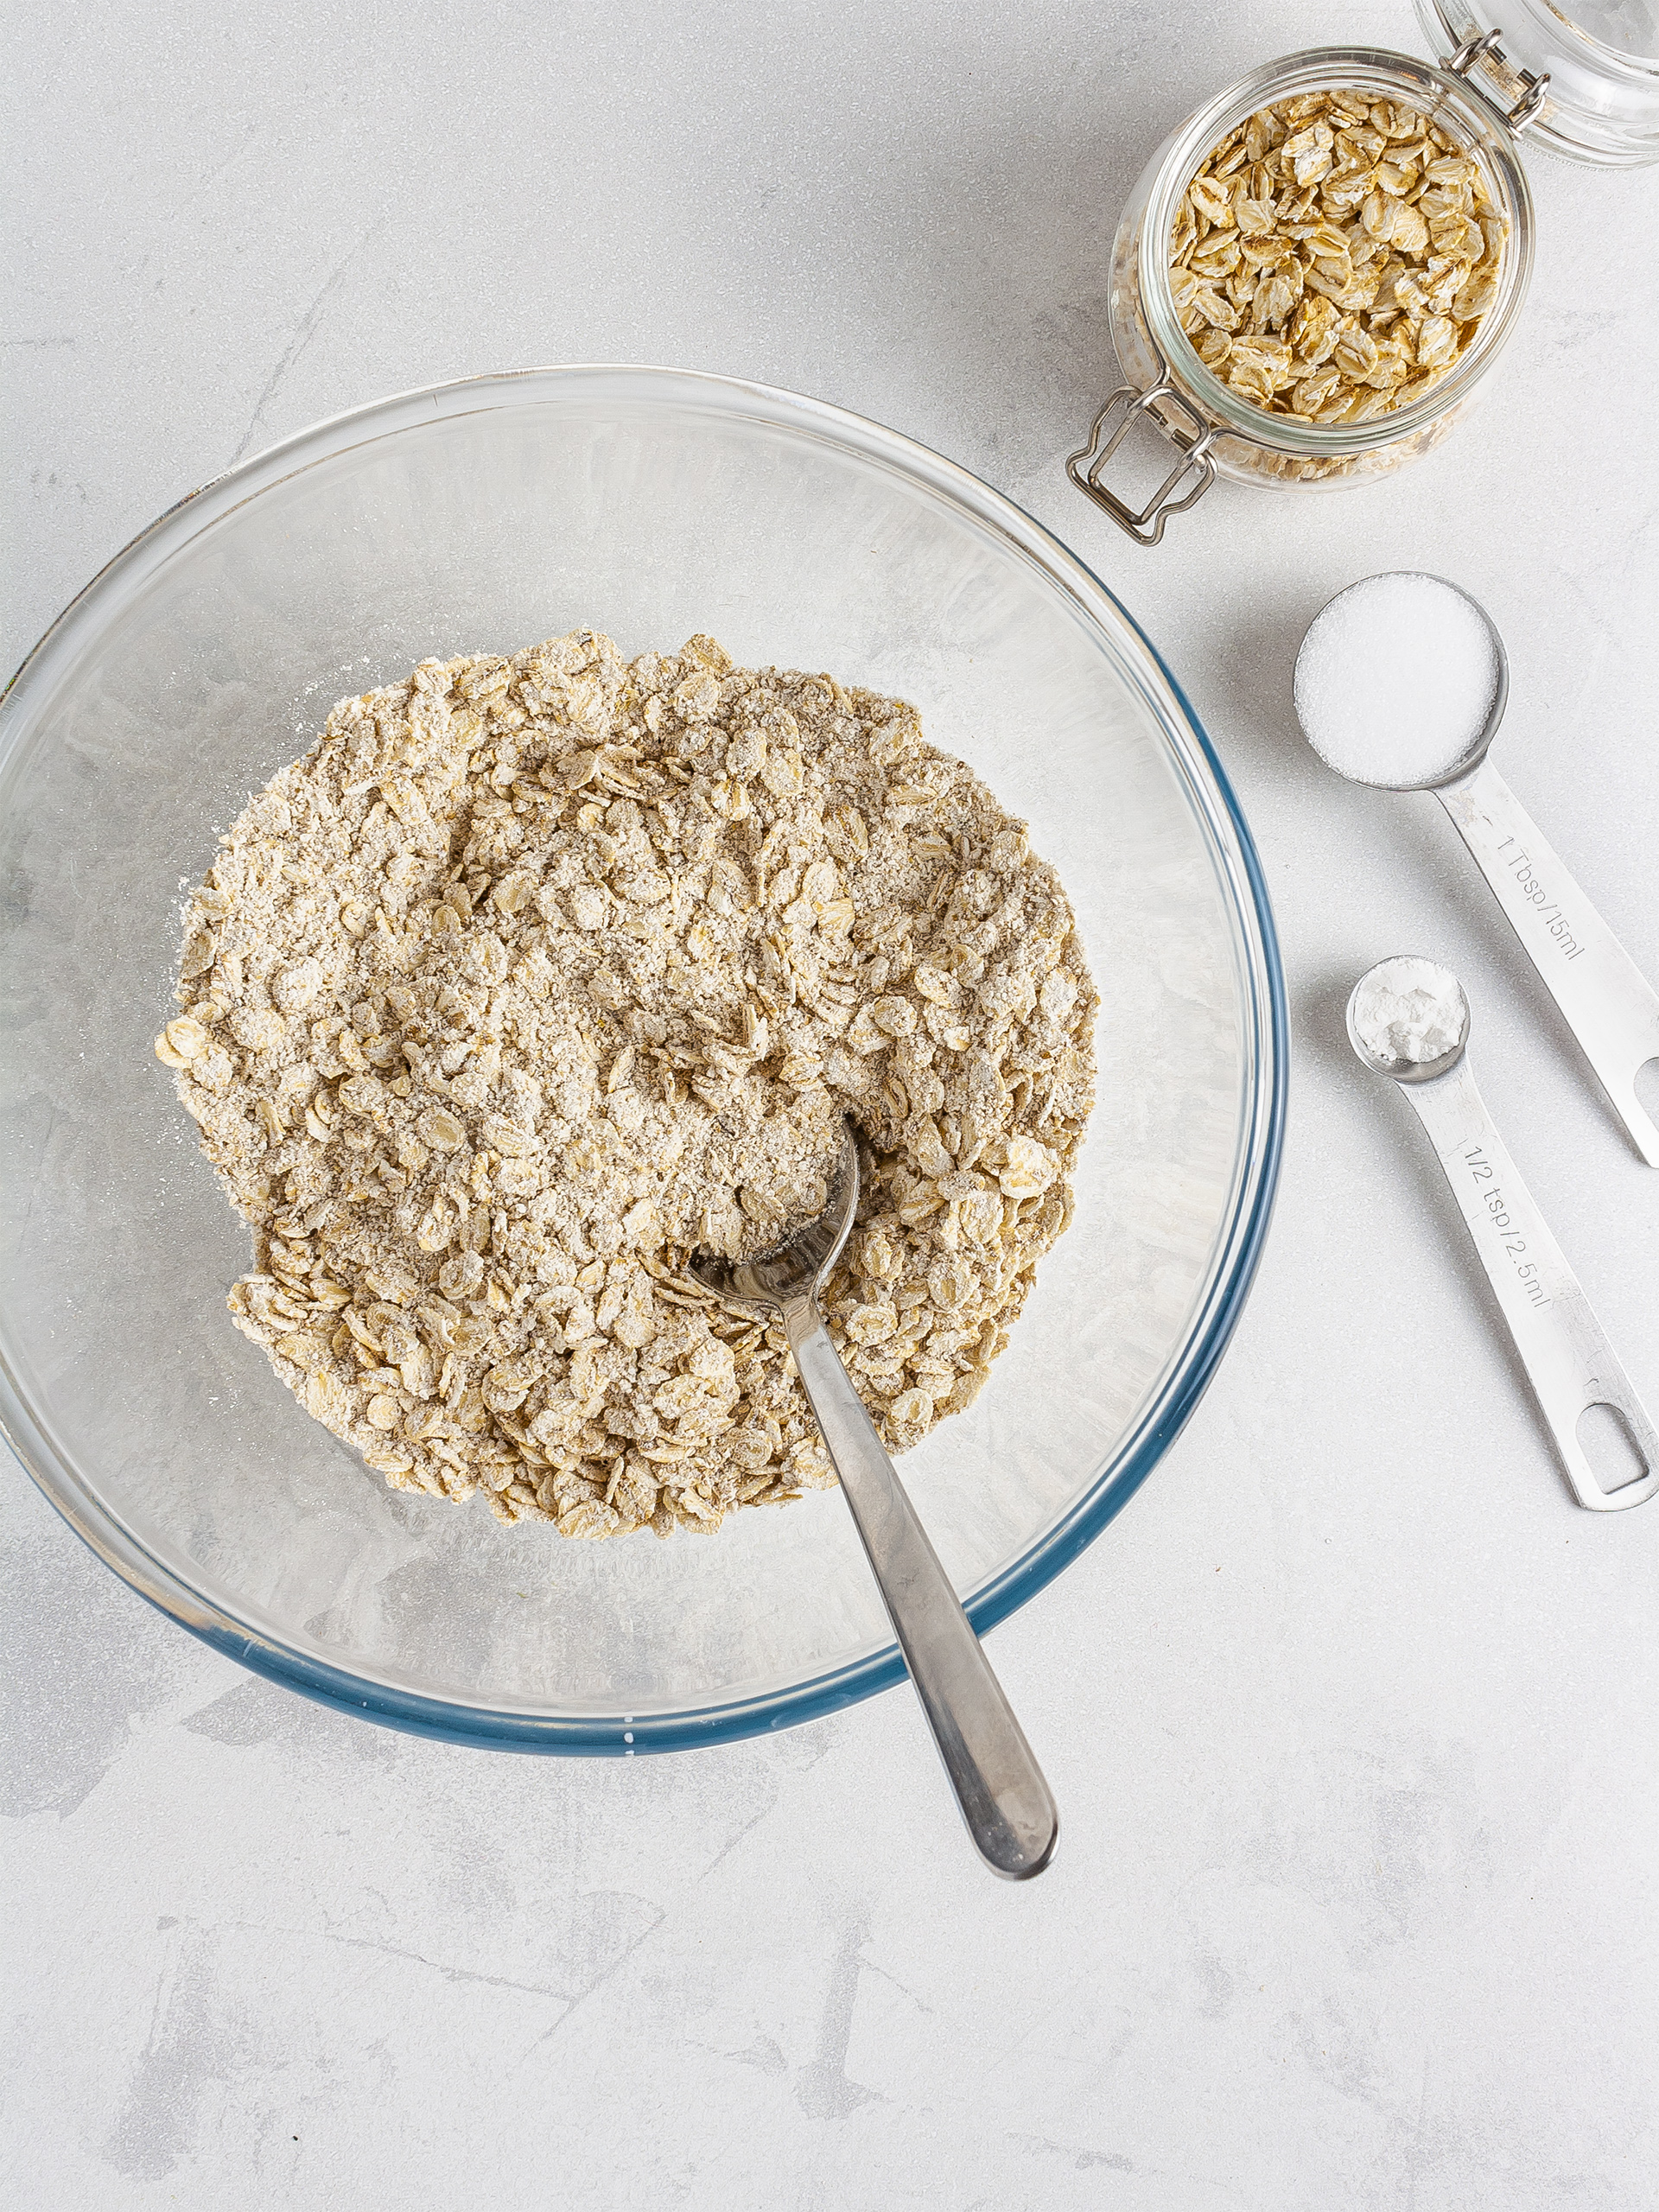 Oat flour, oat flakes, erythritol, and baking powder in a bowl